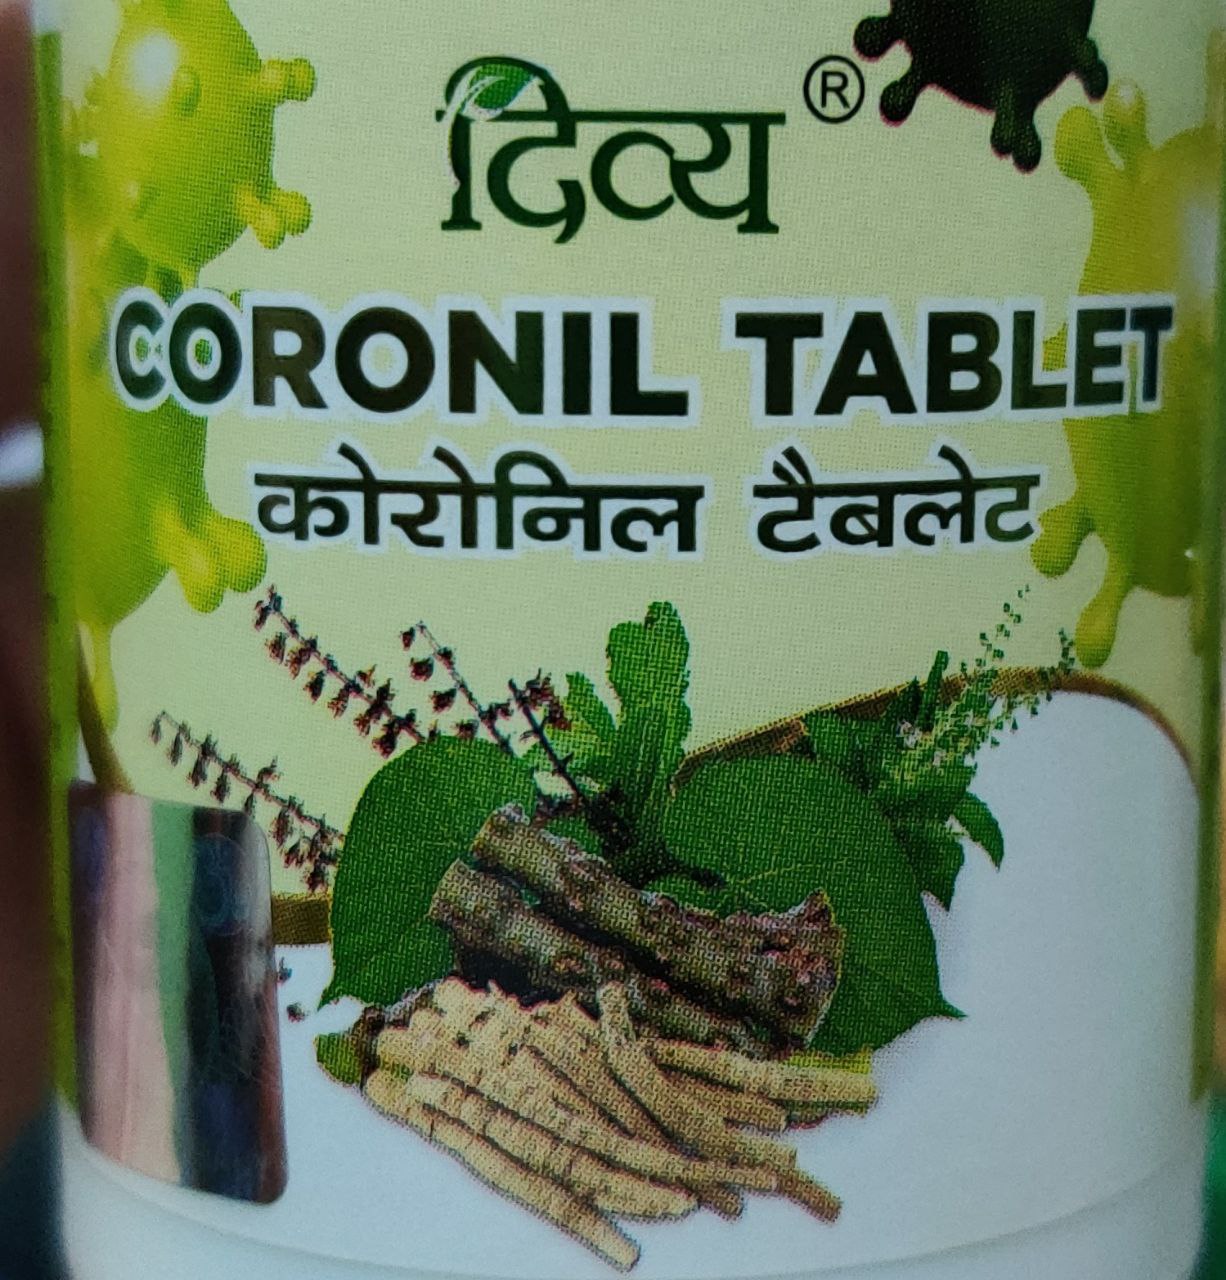 Madras HC Has Restrained Pathanjali Ayurved From Using Trademark "CORONIL" 1